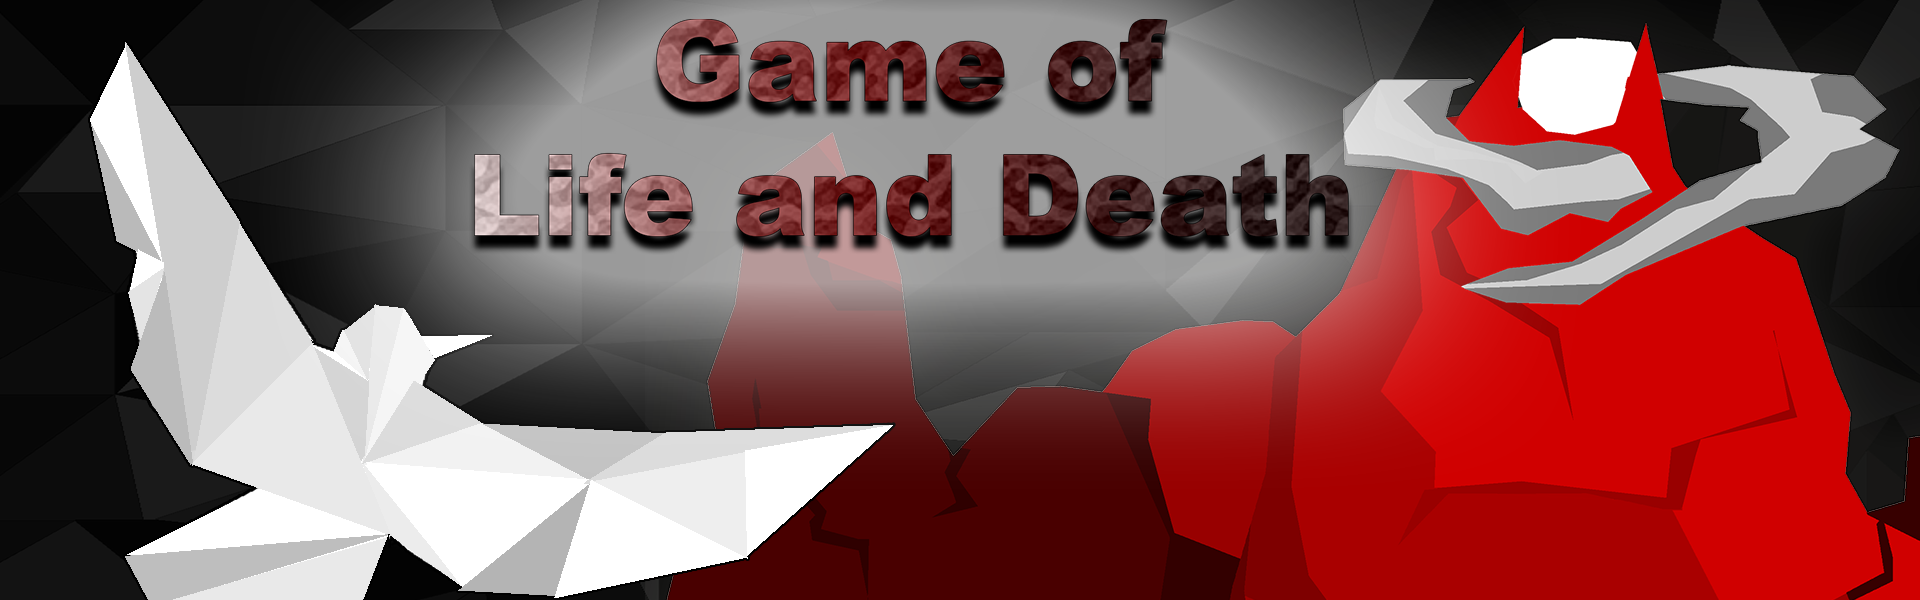 Game of Life and Death